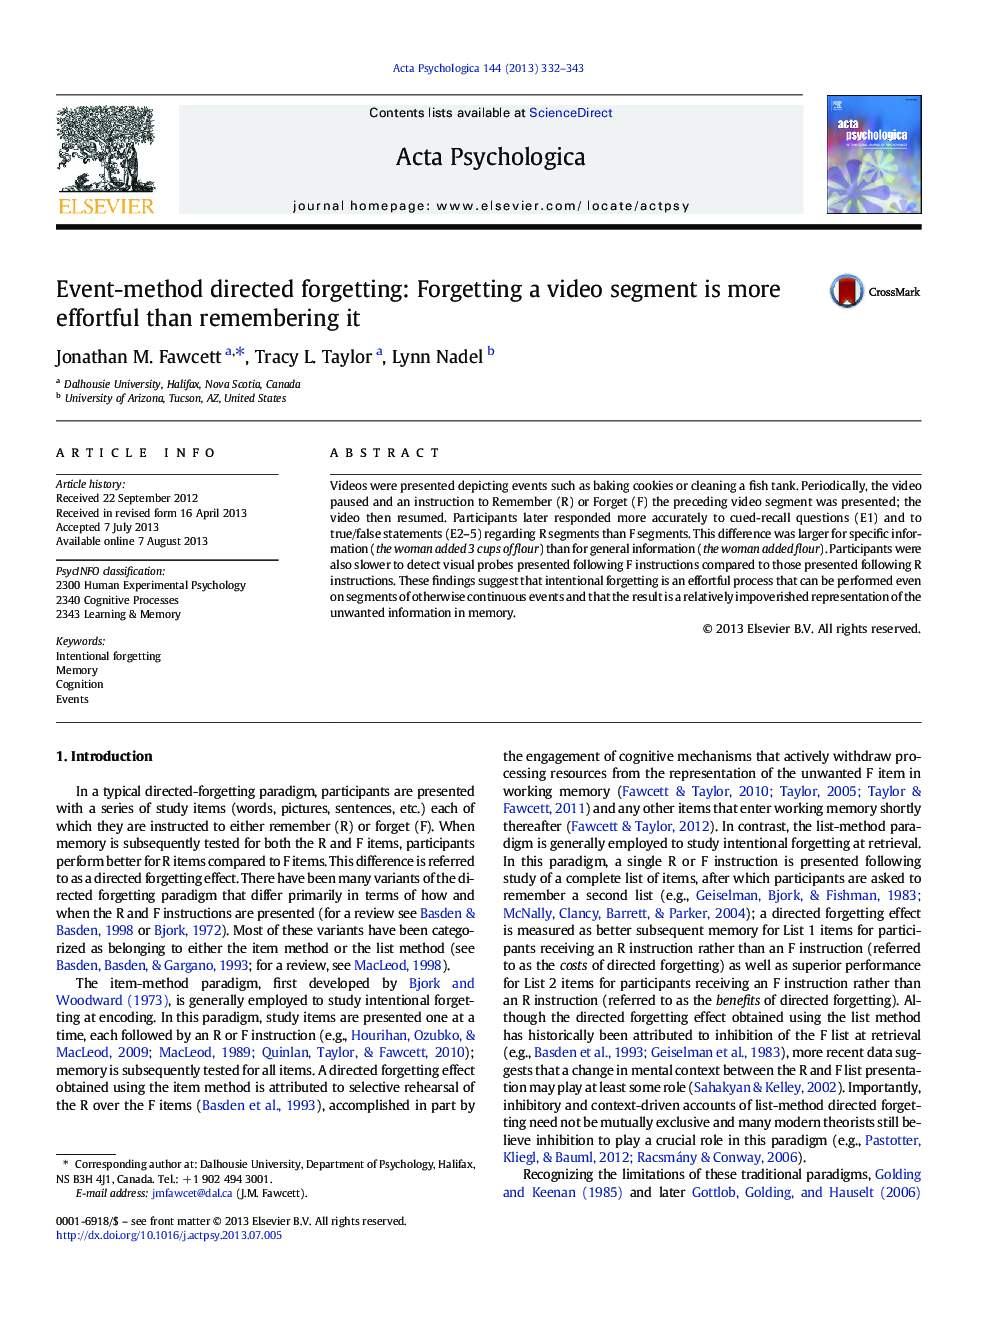 Event-method directed forgetting: Forgetting a video segment is more effortful than remembering it